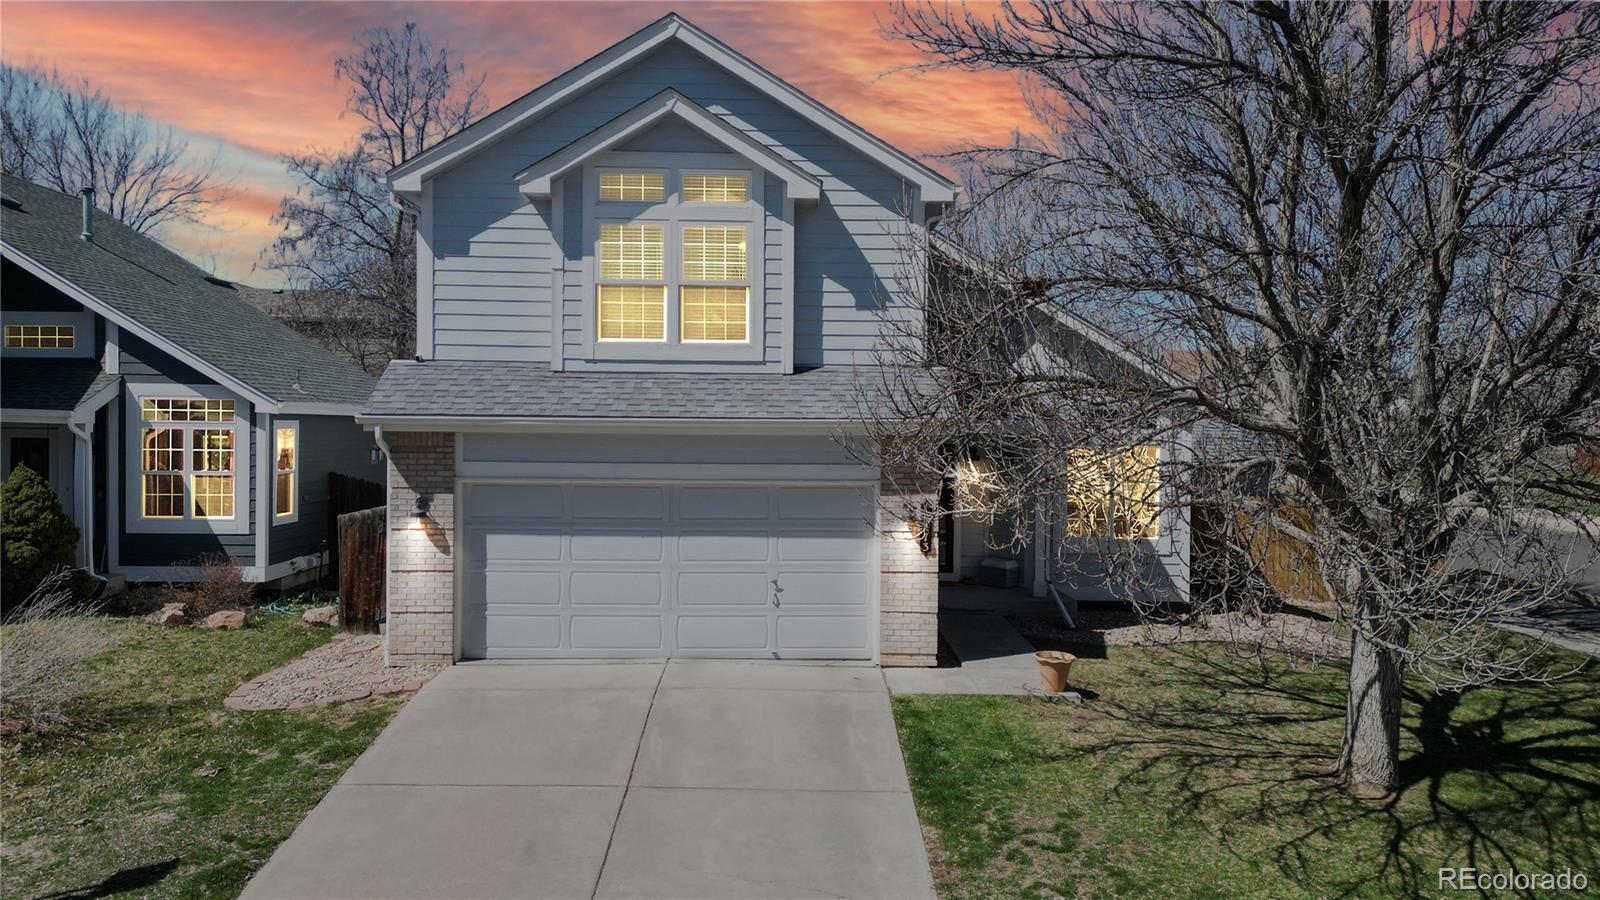 Photo one of 12473 Abbey St Broomfield CO 80020 | MLS 2865412